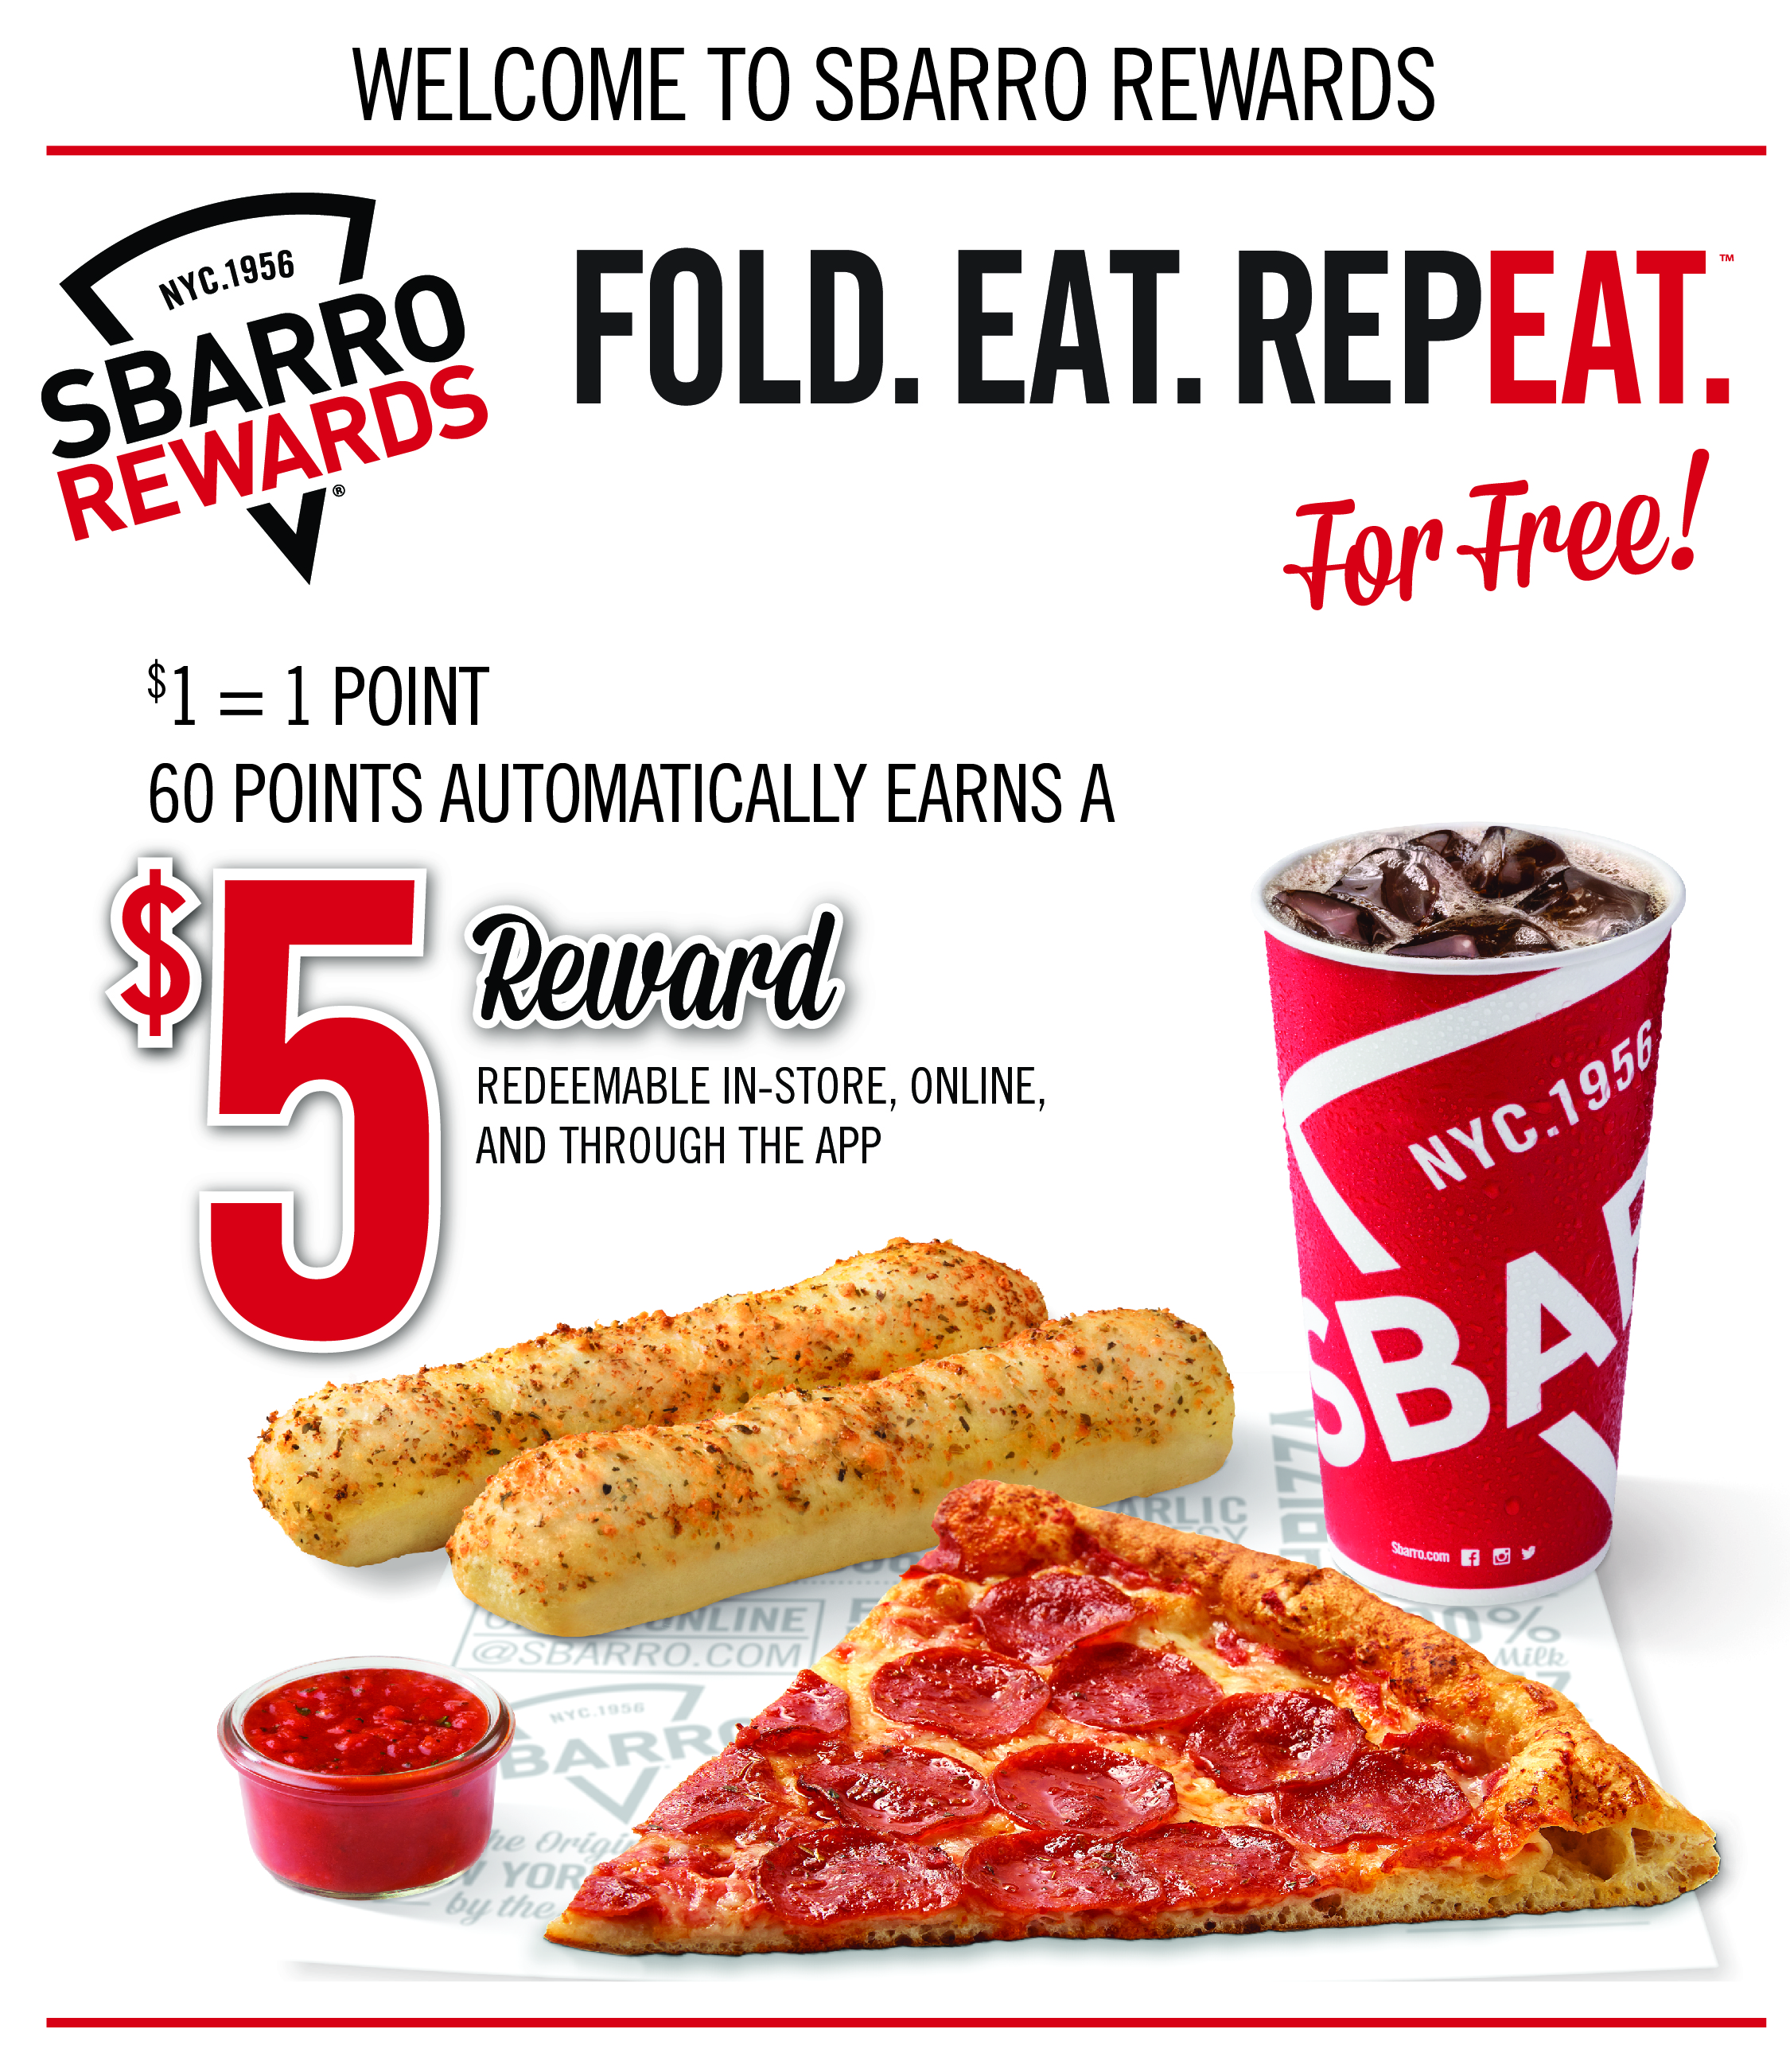 $1 = 1 point. 60 points automatically earns you a $5 reward toward your next purchase